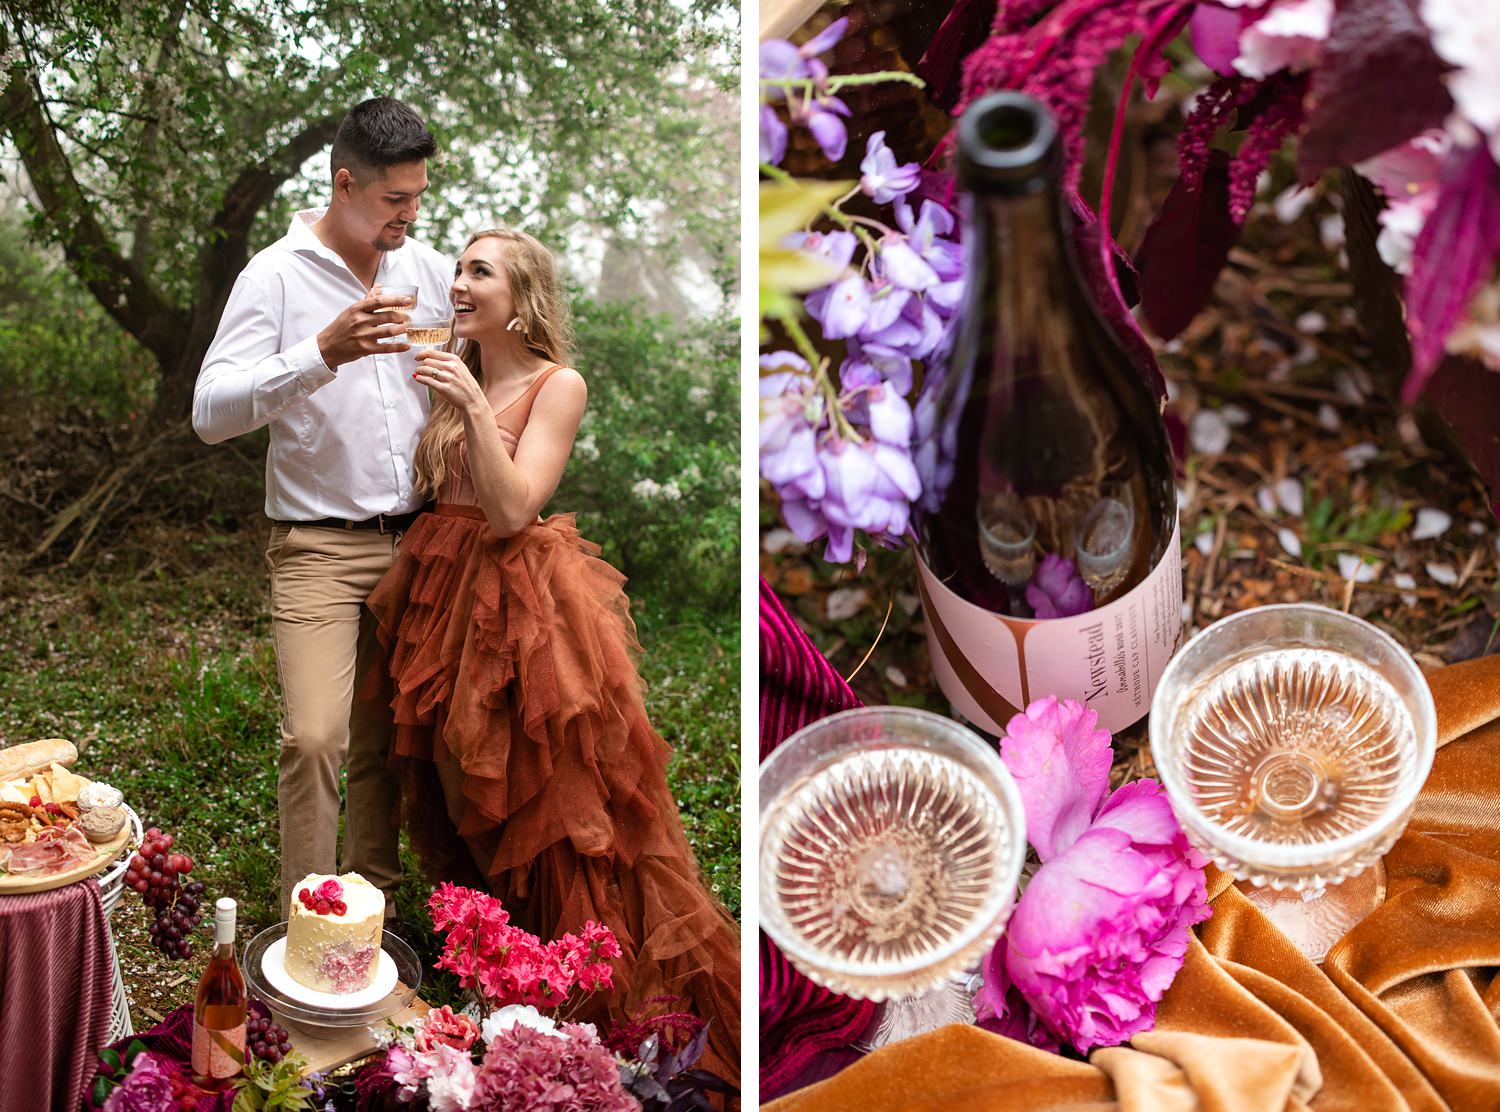 The bridal couple open Newstead Champagne at their elopement picnic